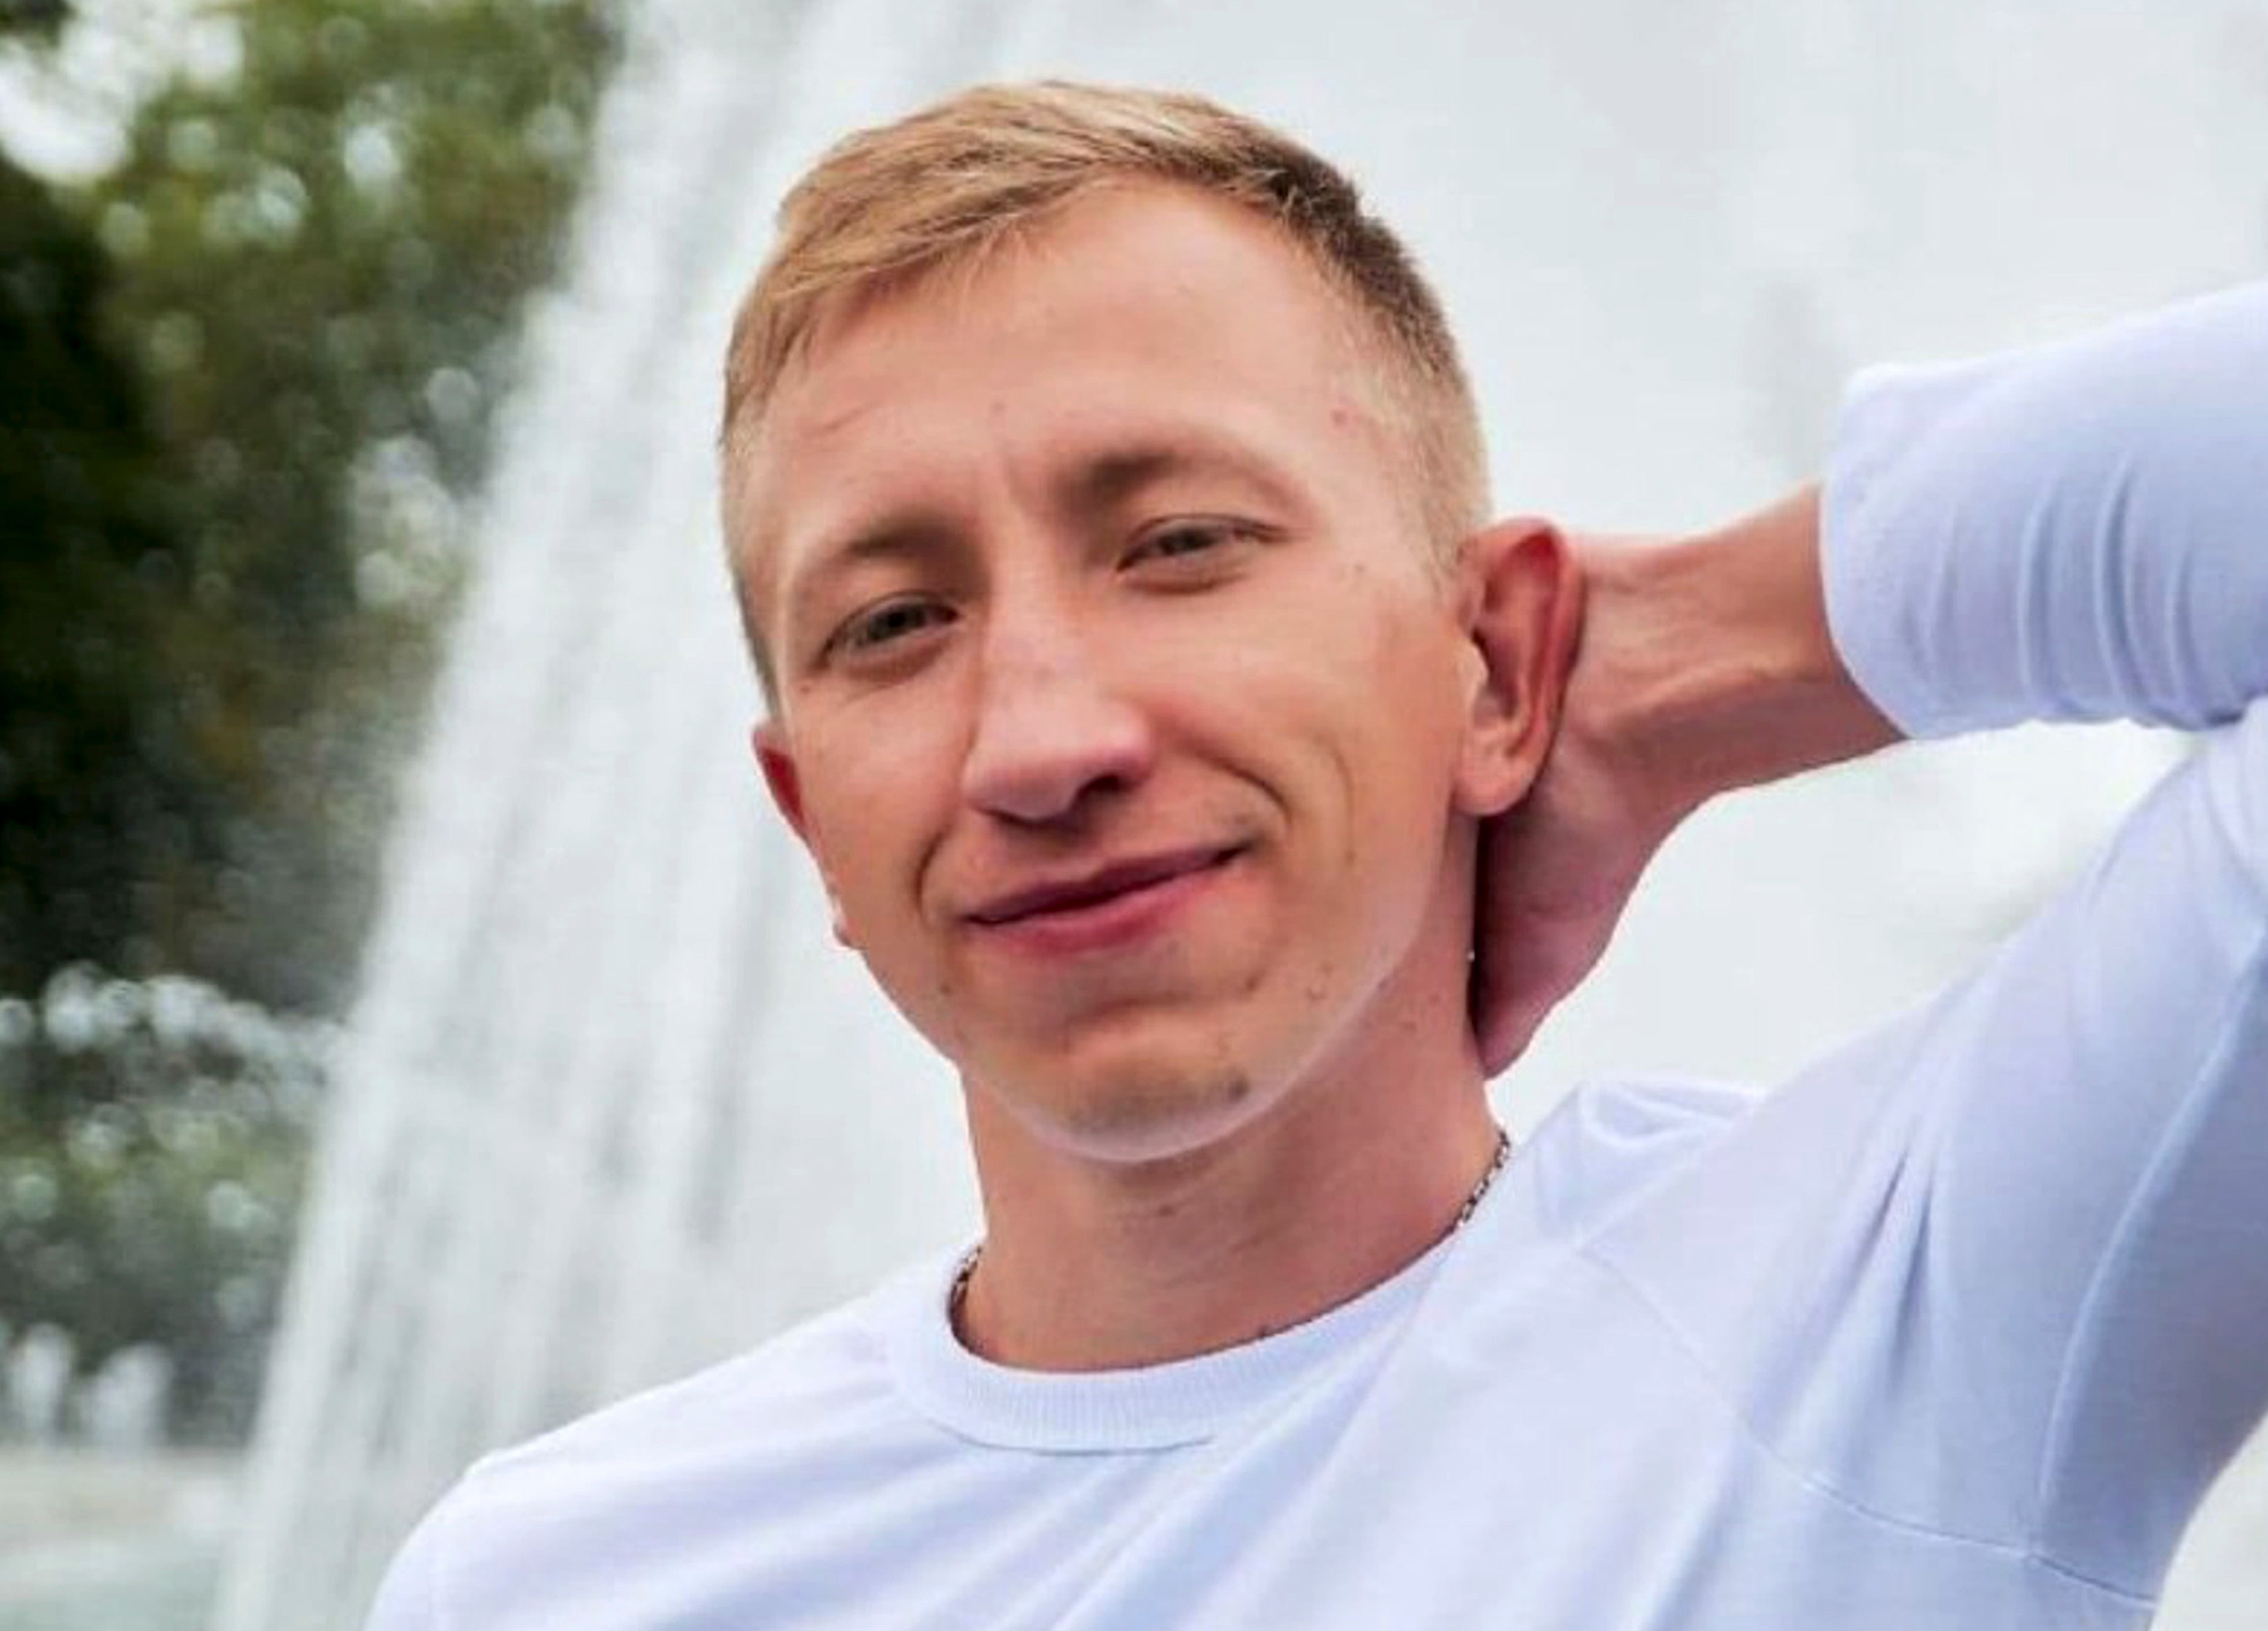 Vitaly Shishov had previously reported being followed by strangers while out jogging